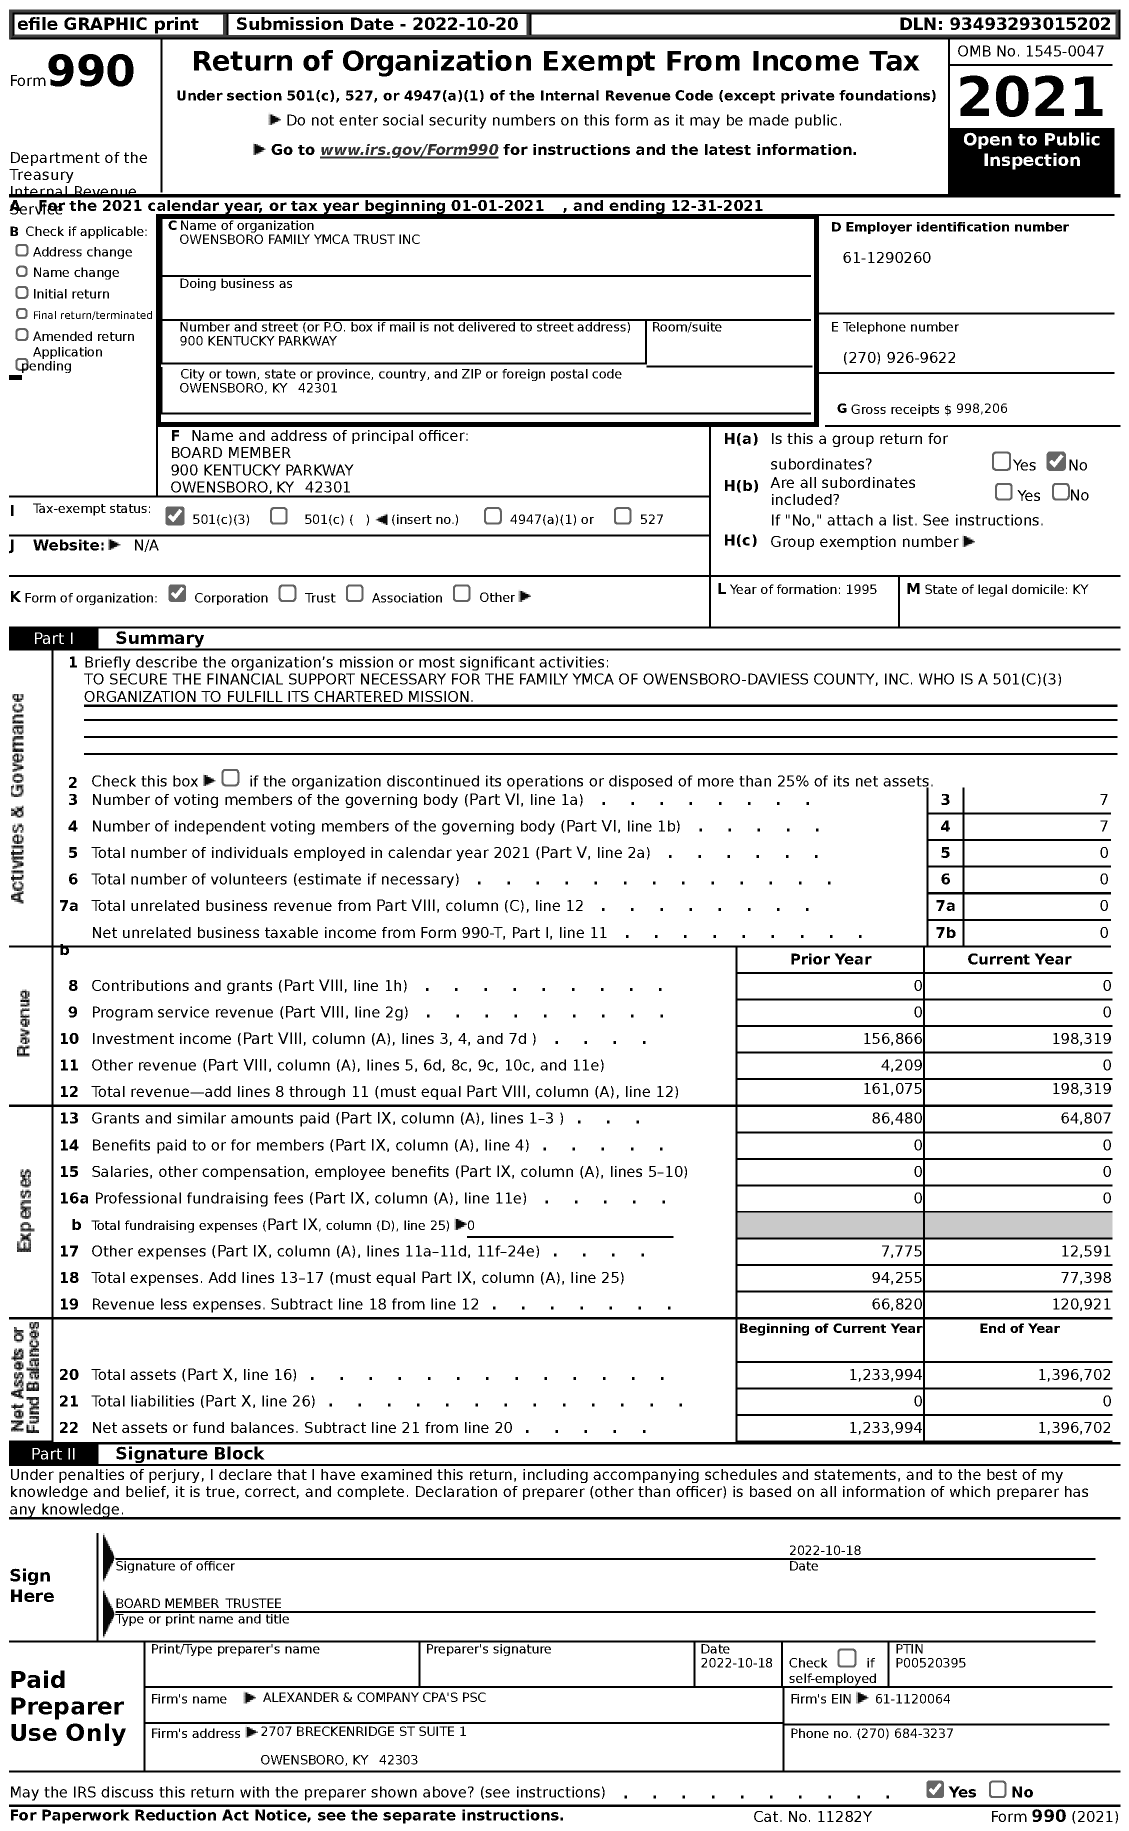 Image of first page of 2021 Form 990 for Owensboro Family Ymca Trust